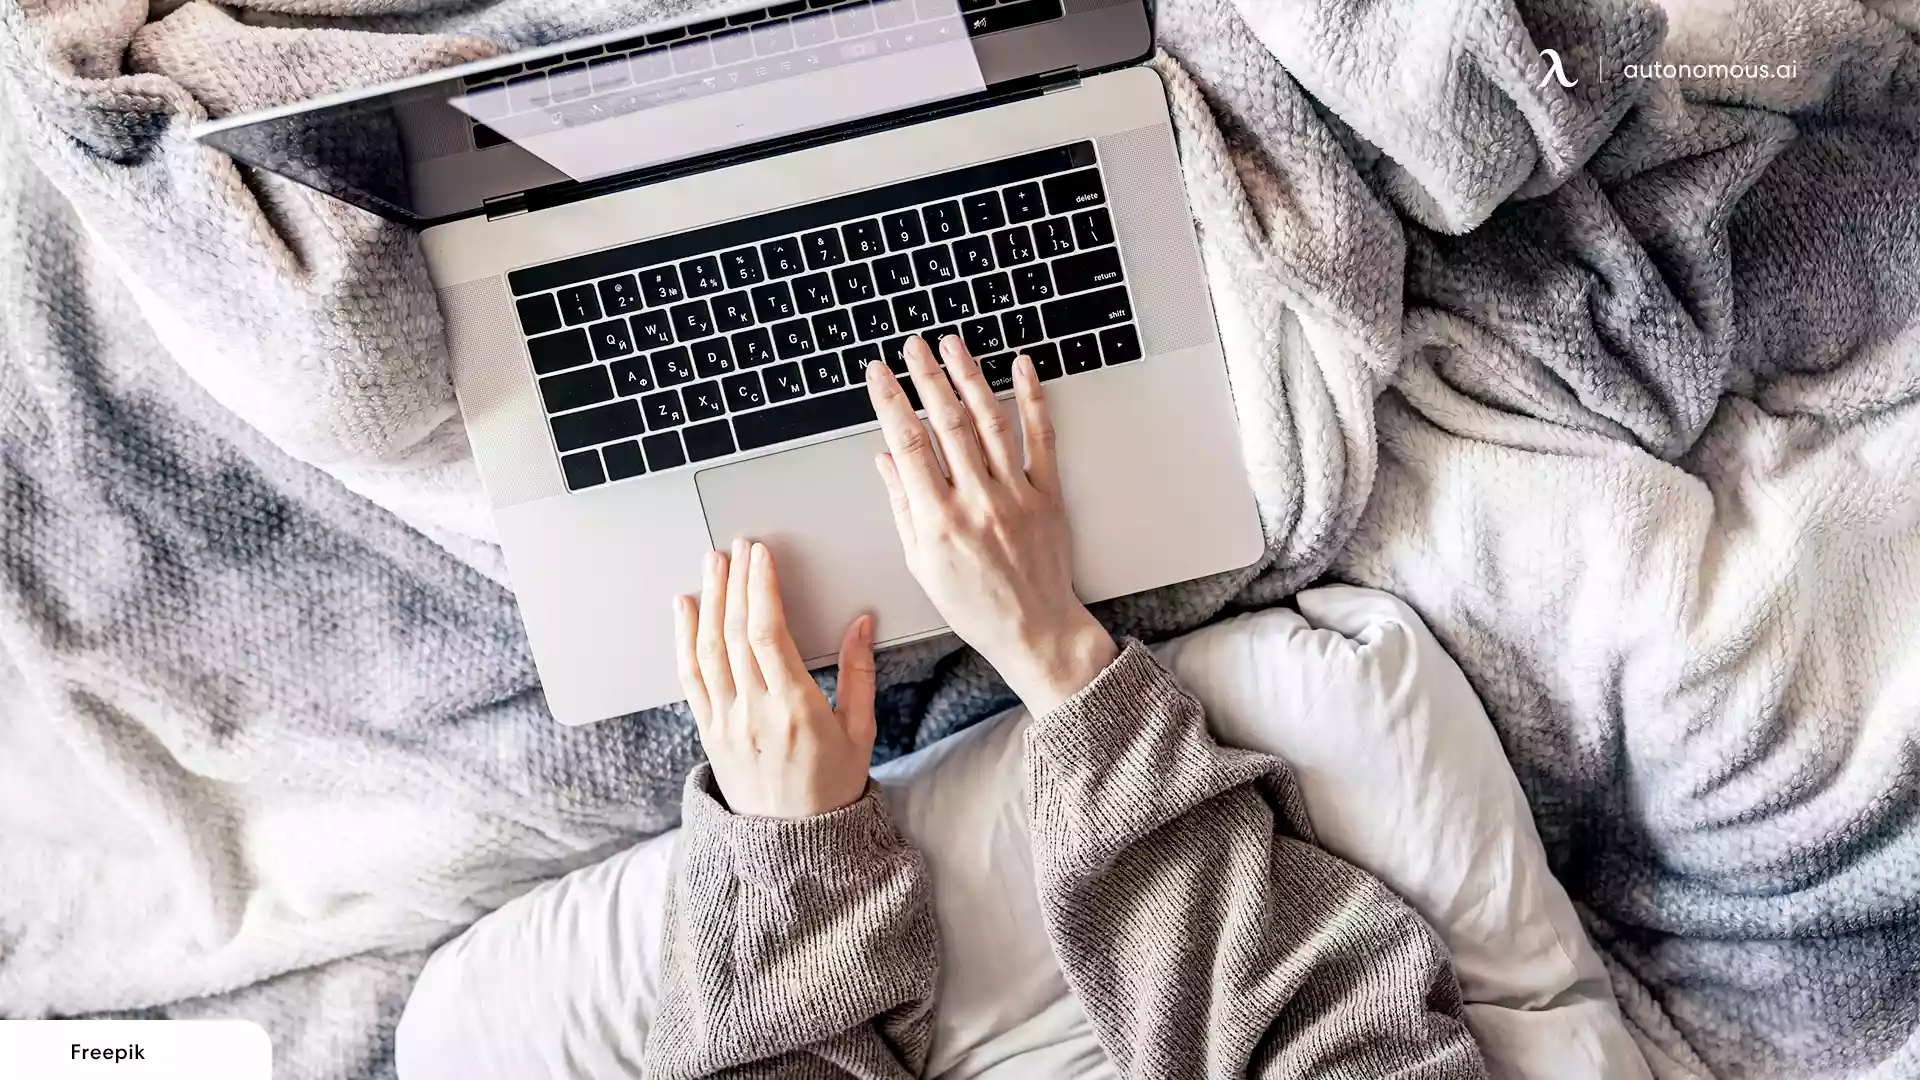 Remote Workers from Bed – What’s the Consequence?